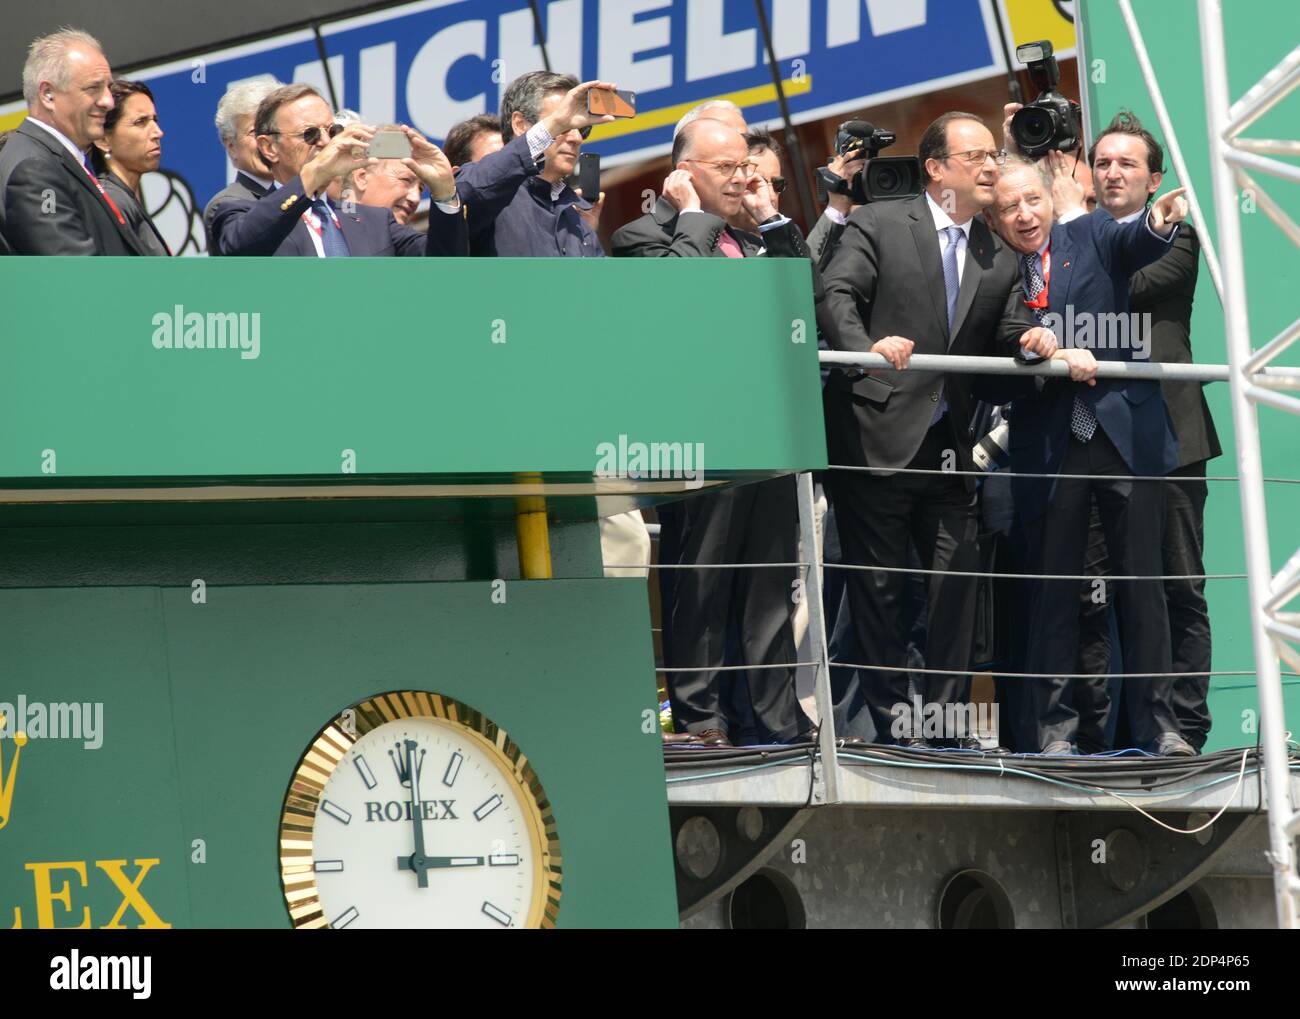 French President Francois Hollande with Pierre Fillon , France's President of the Automobile Club de l’Ouest (ACO), in charge of the organisation of the Le Mans 24-hours endurance race and France's FIA President Jean Todt watching the start of the Le Mans 24-hours endurance race in Le Mans, western France, on June 13, 2015. Photo by Guy Durand/ABACAPRESS.COM Banque D'Images